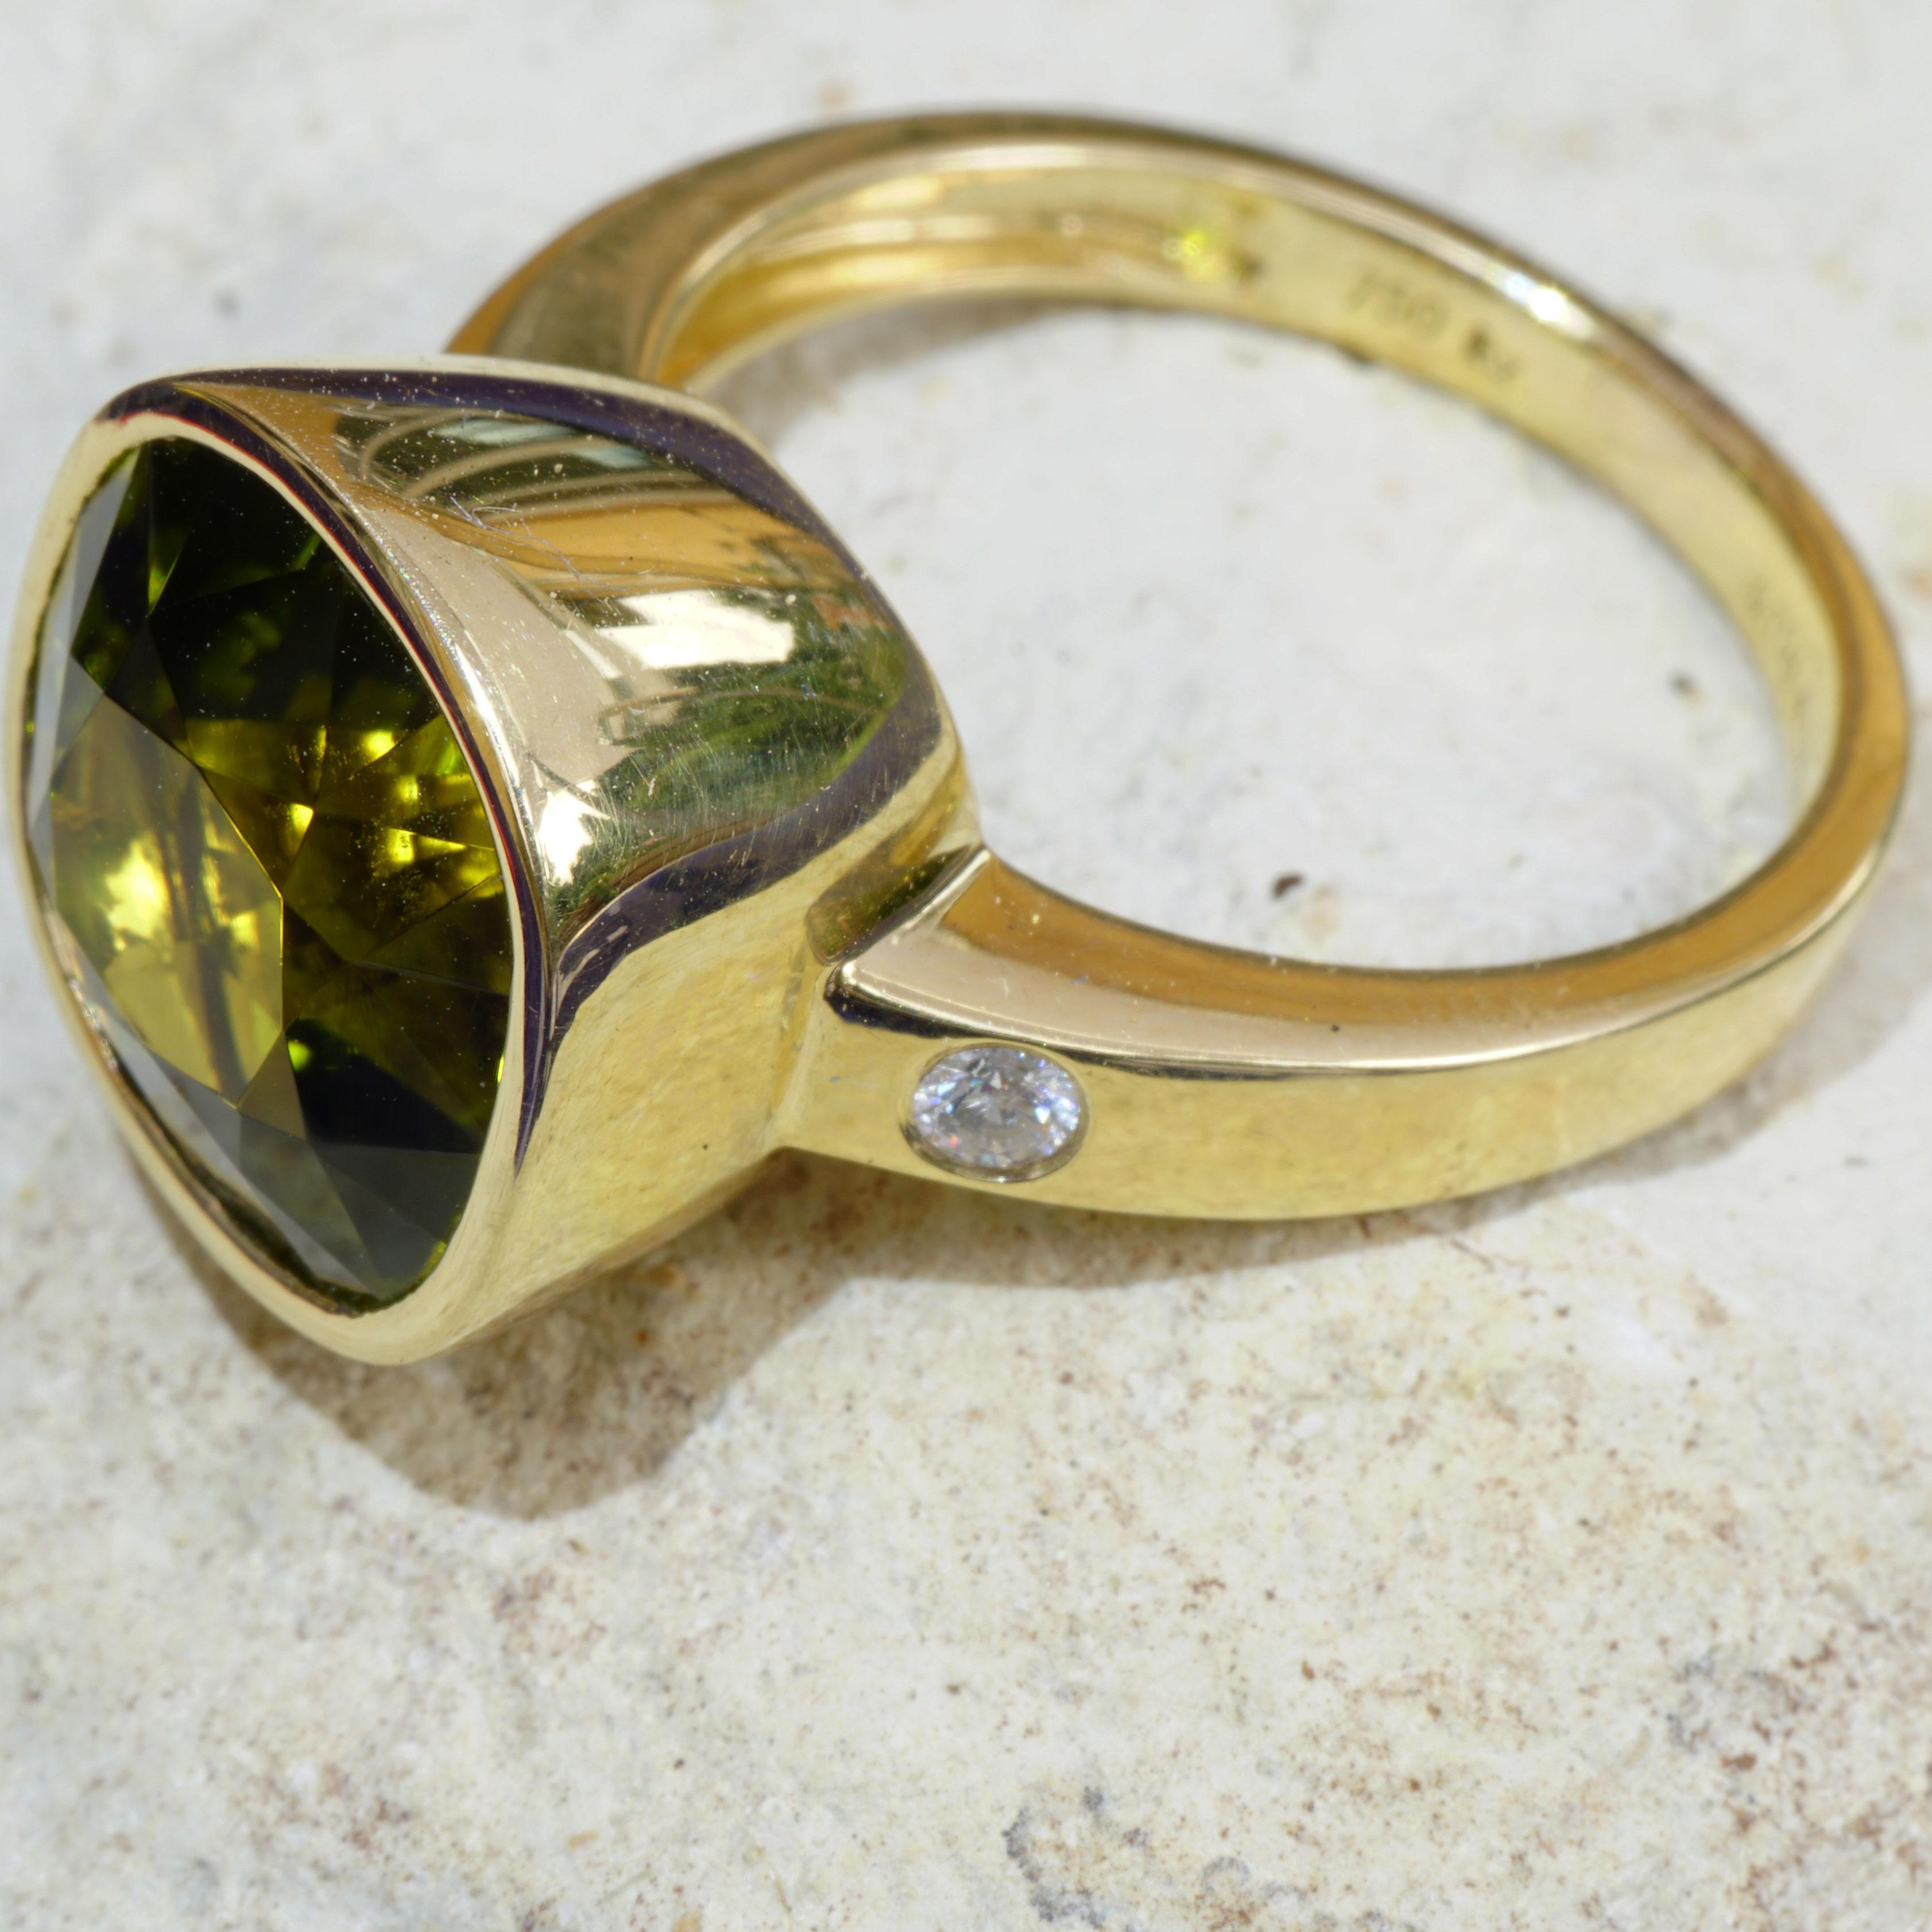 Brilliant Cut Chrome Tourmaline Brilliant Ring Exceptional Color 18kt Gold Yellow-Greenish For Sale